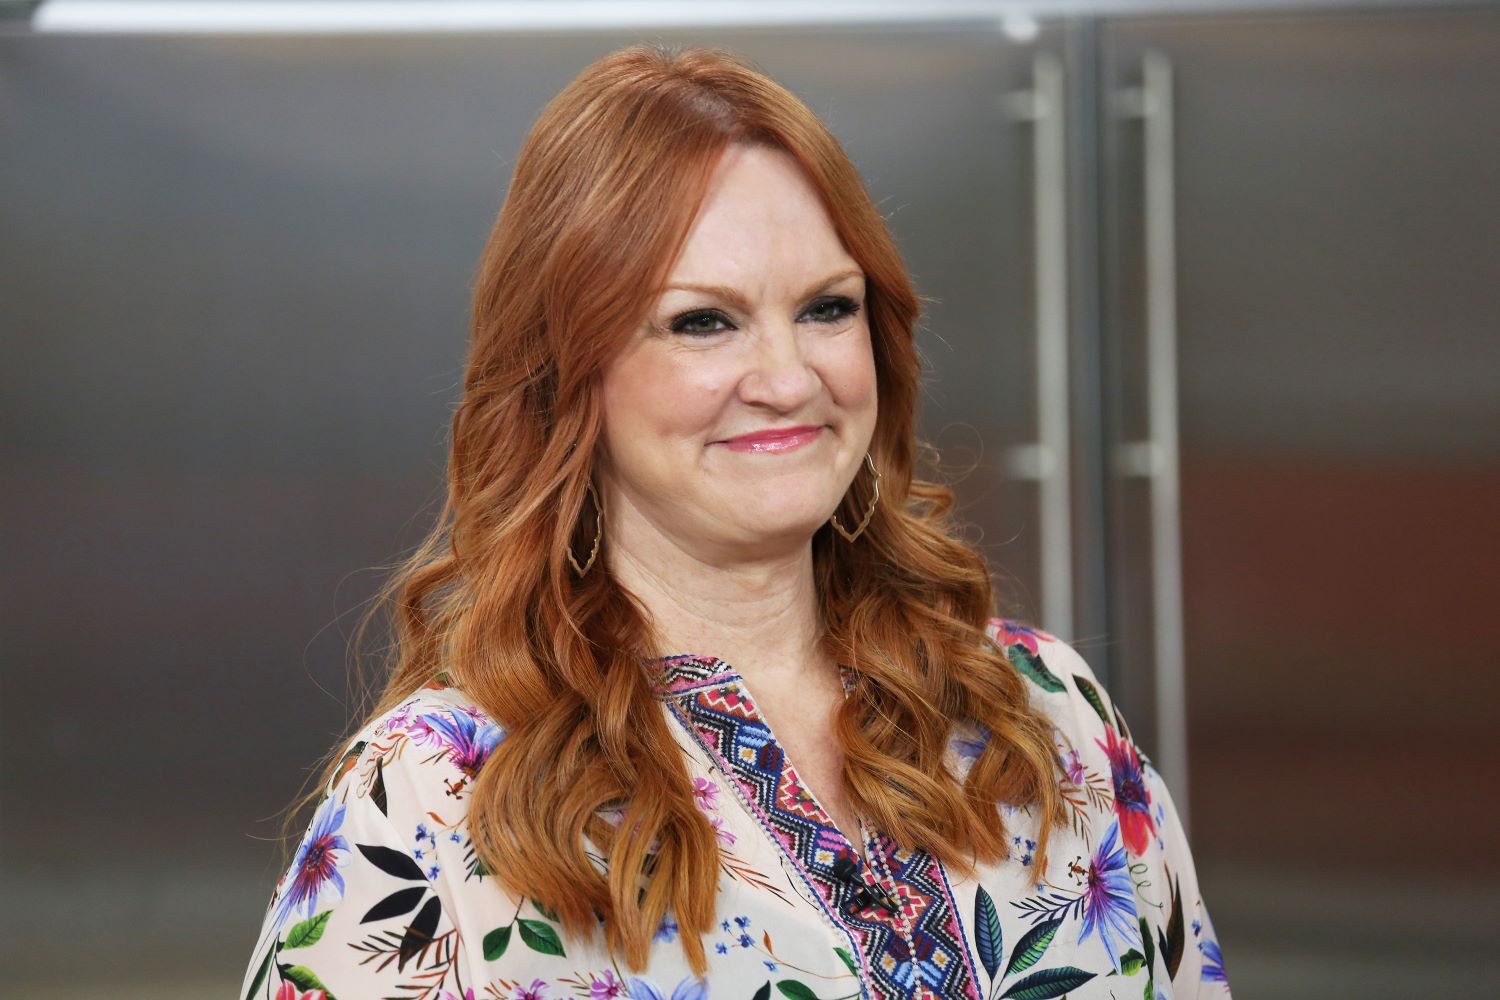 'The Pioneer Woman' Ree Drummond on Today show